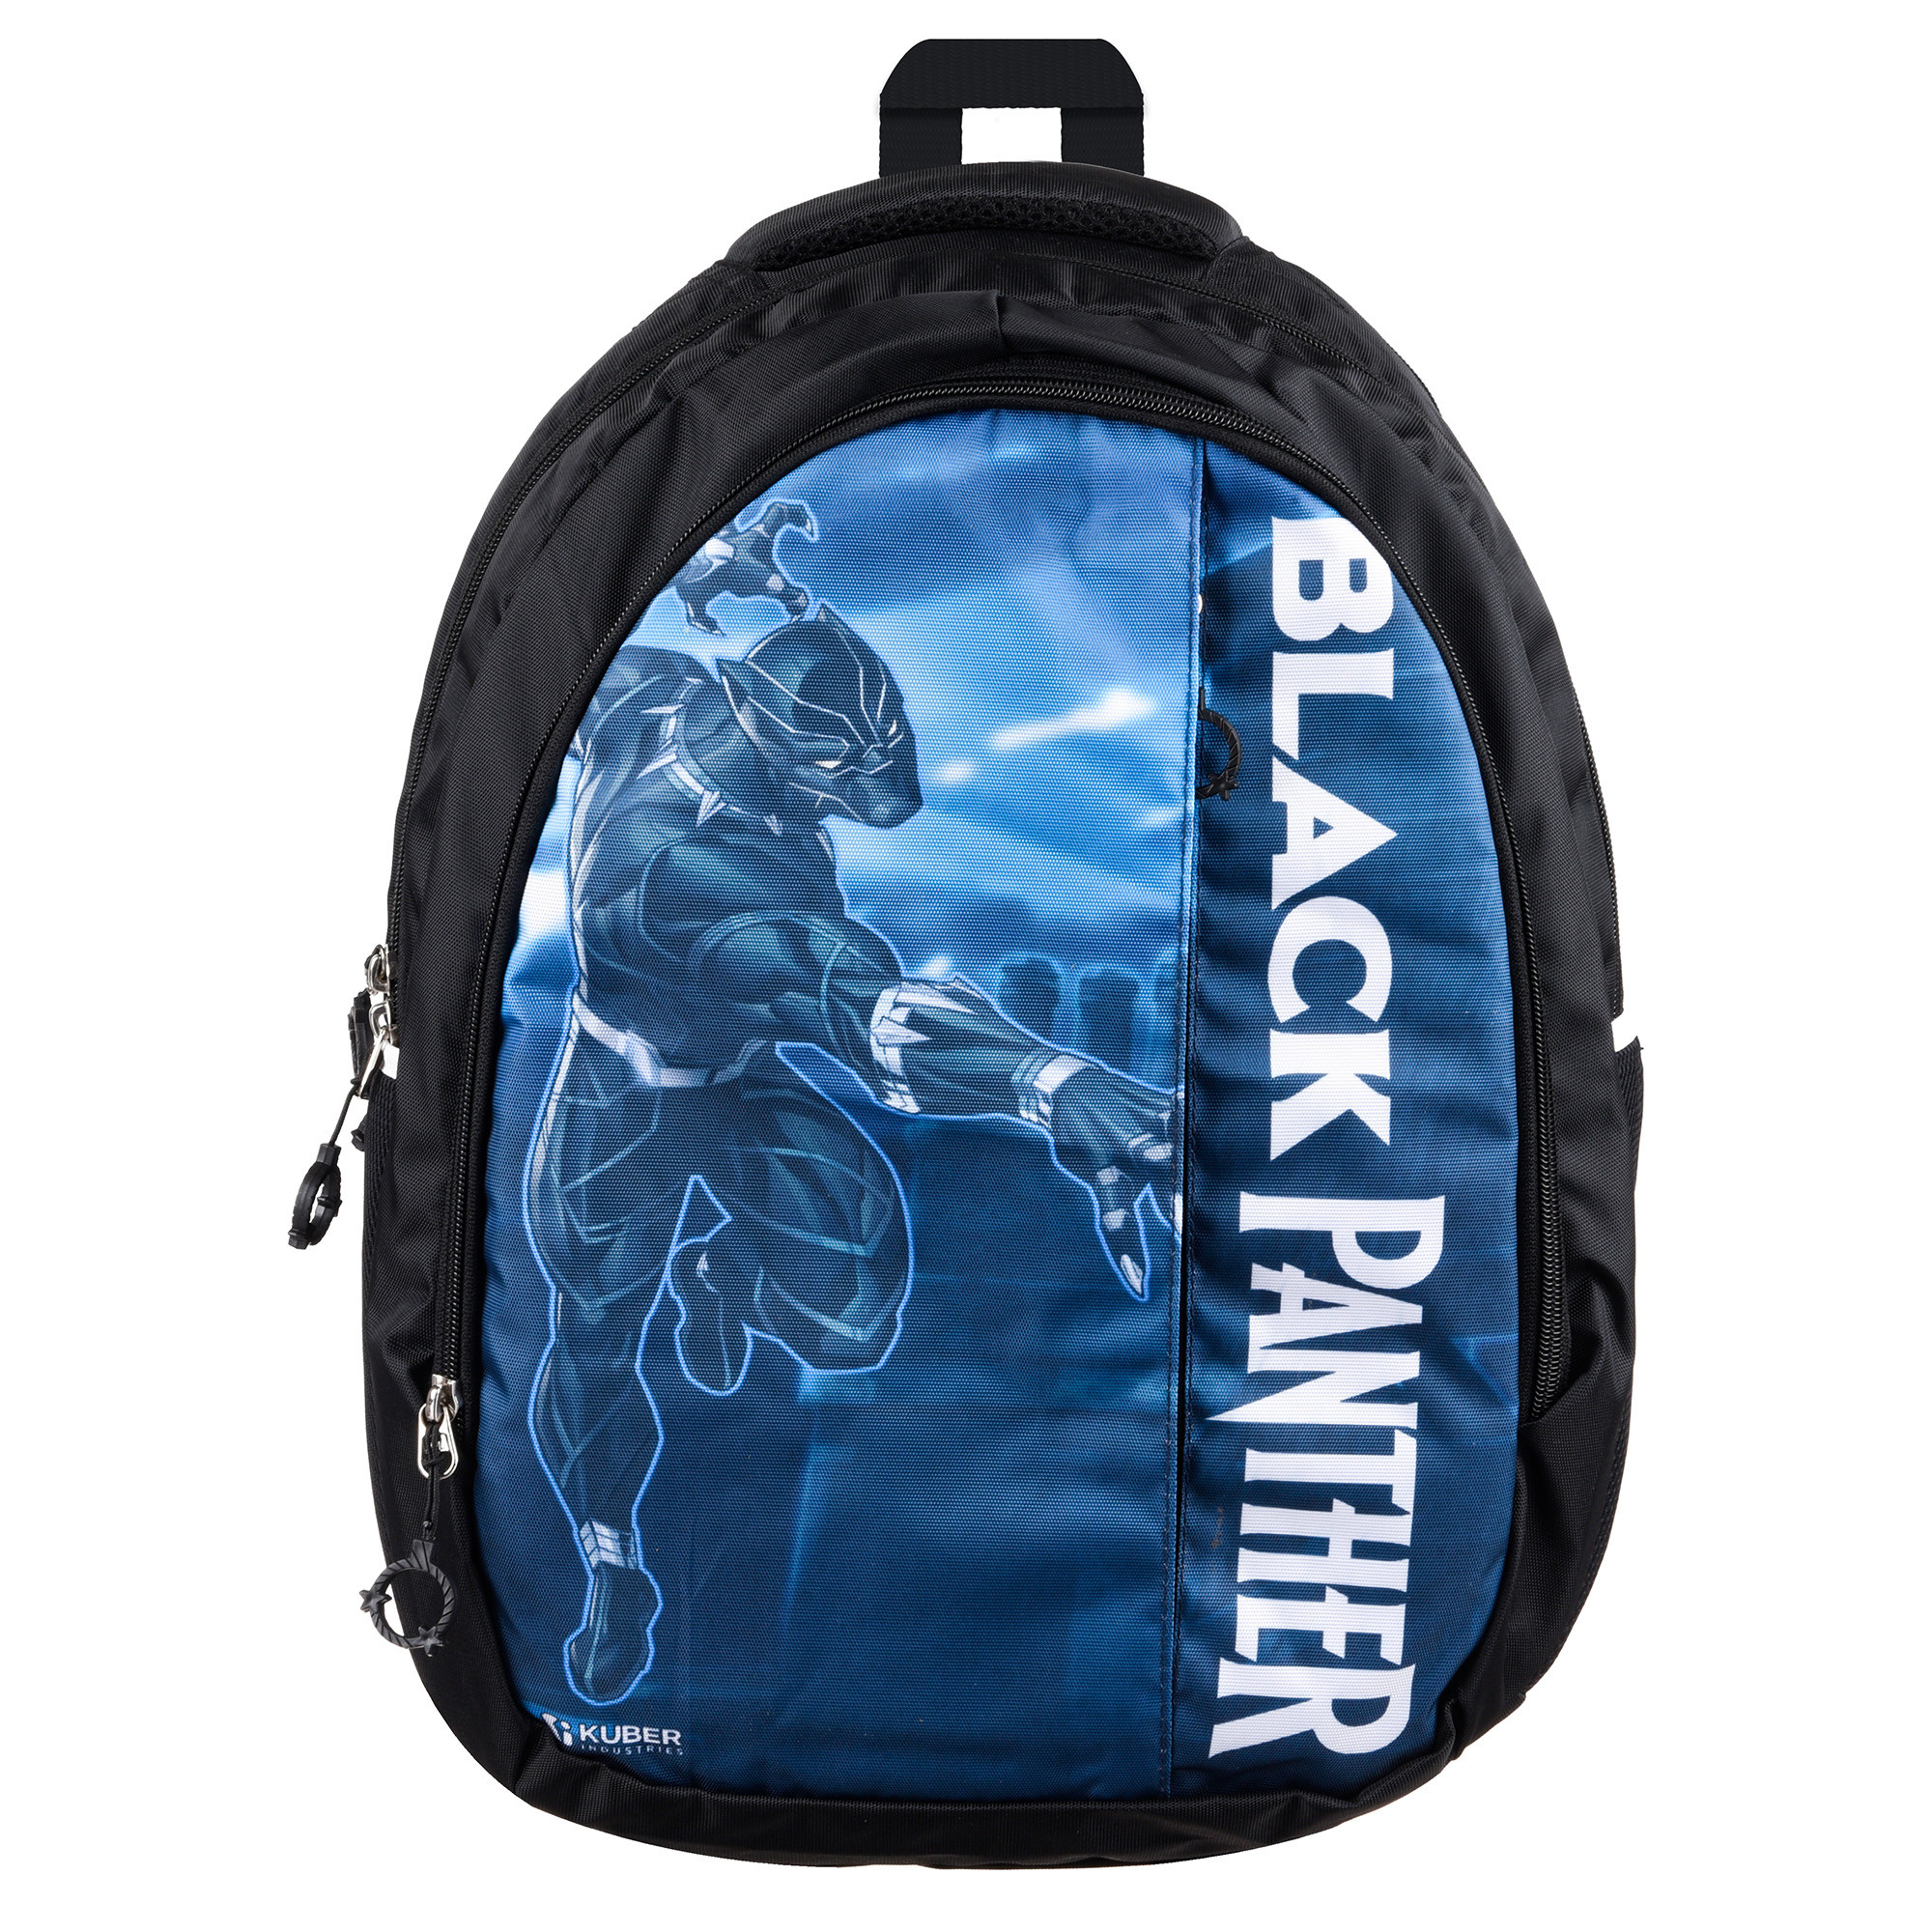 Kuber Industries Marvel Black Panther School Bags | Kids School Bags | Collage Bookbag | Travel Backpack | School Bag for Girls & Boys | School Bag with 5 Compartments | Include Bag Cover | Black